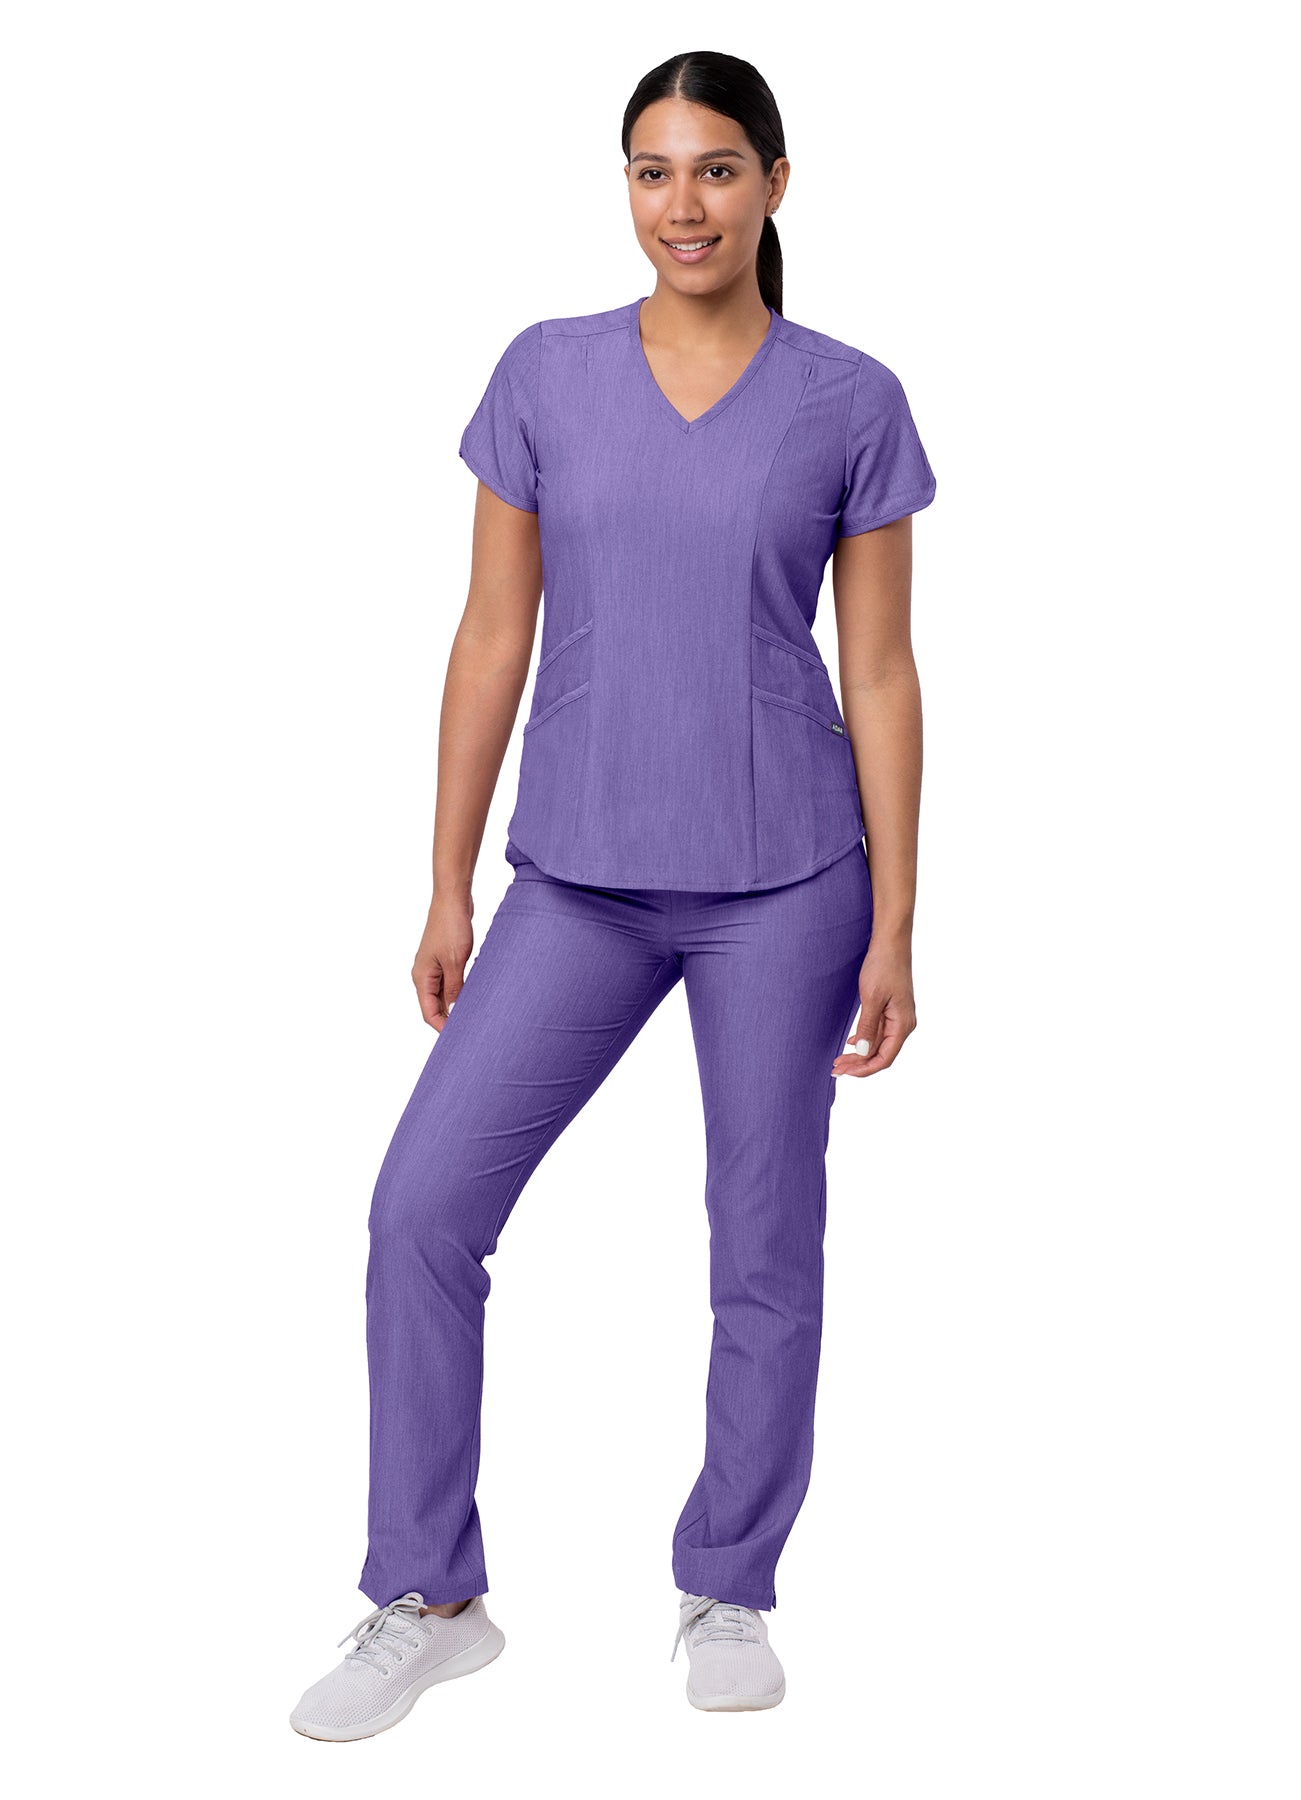 ADAR Pro Heather Grape color Women's Yoga Scrub Set.  Top has 4 pockets with V-neck line and fitted yoga pants Beyond Medwear Apparel